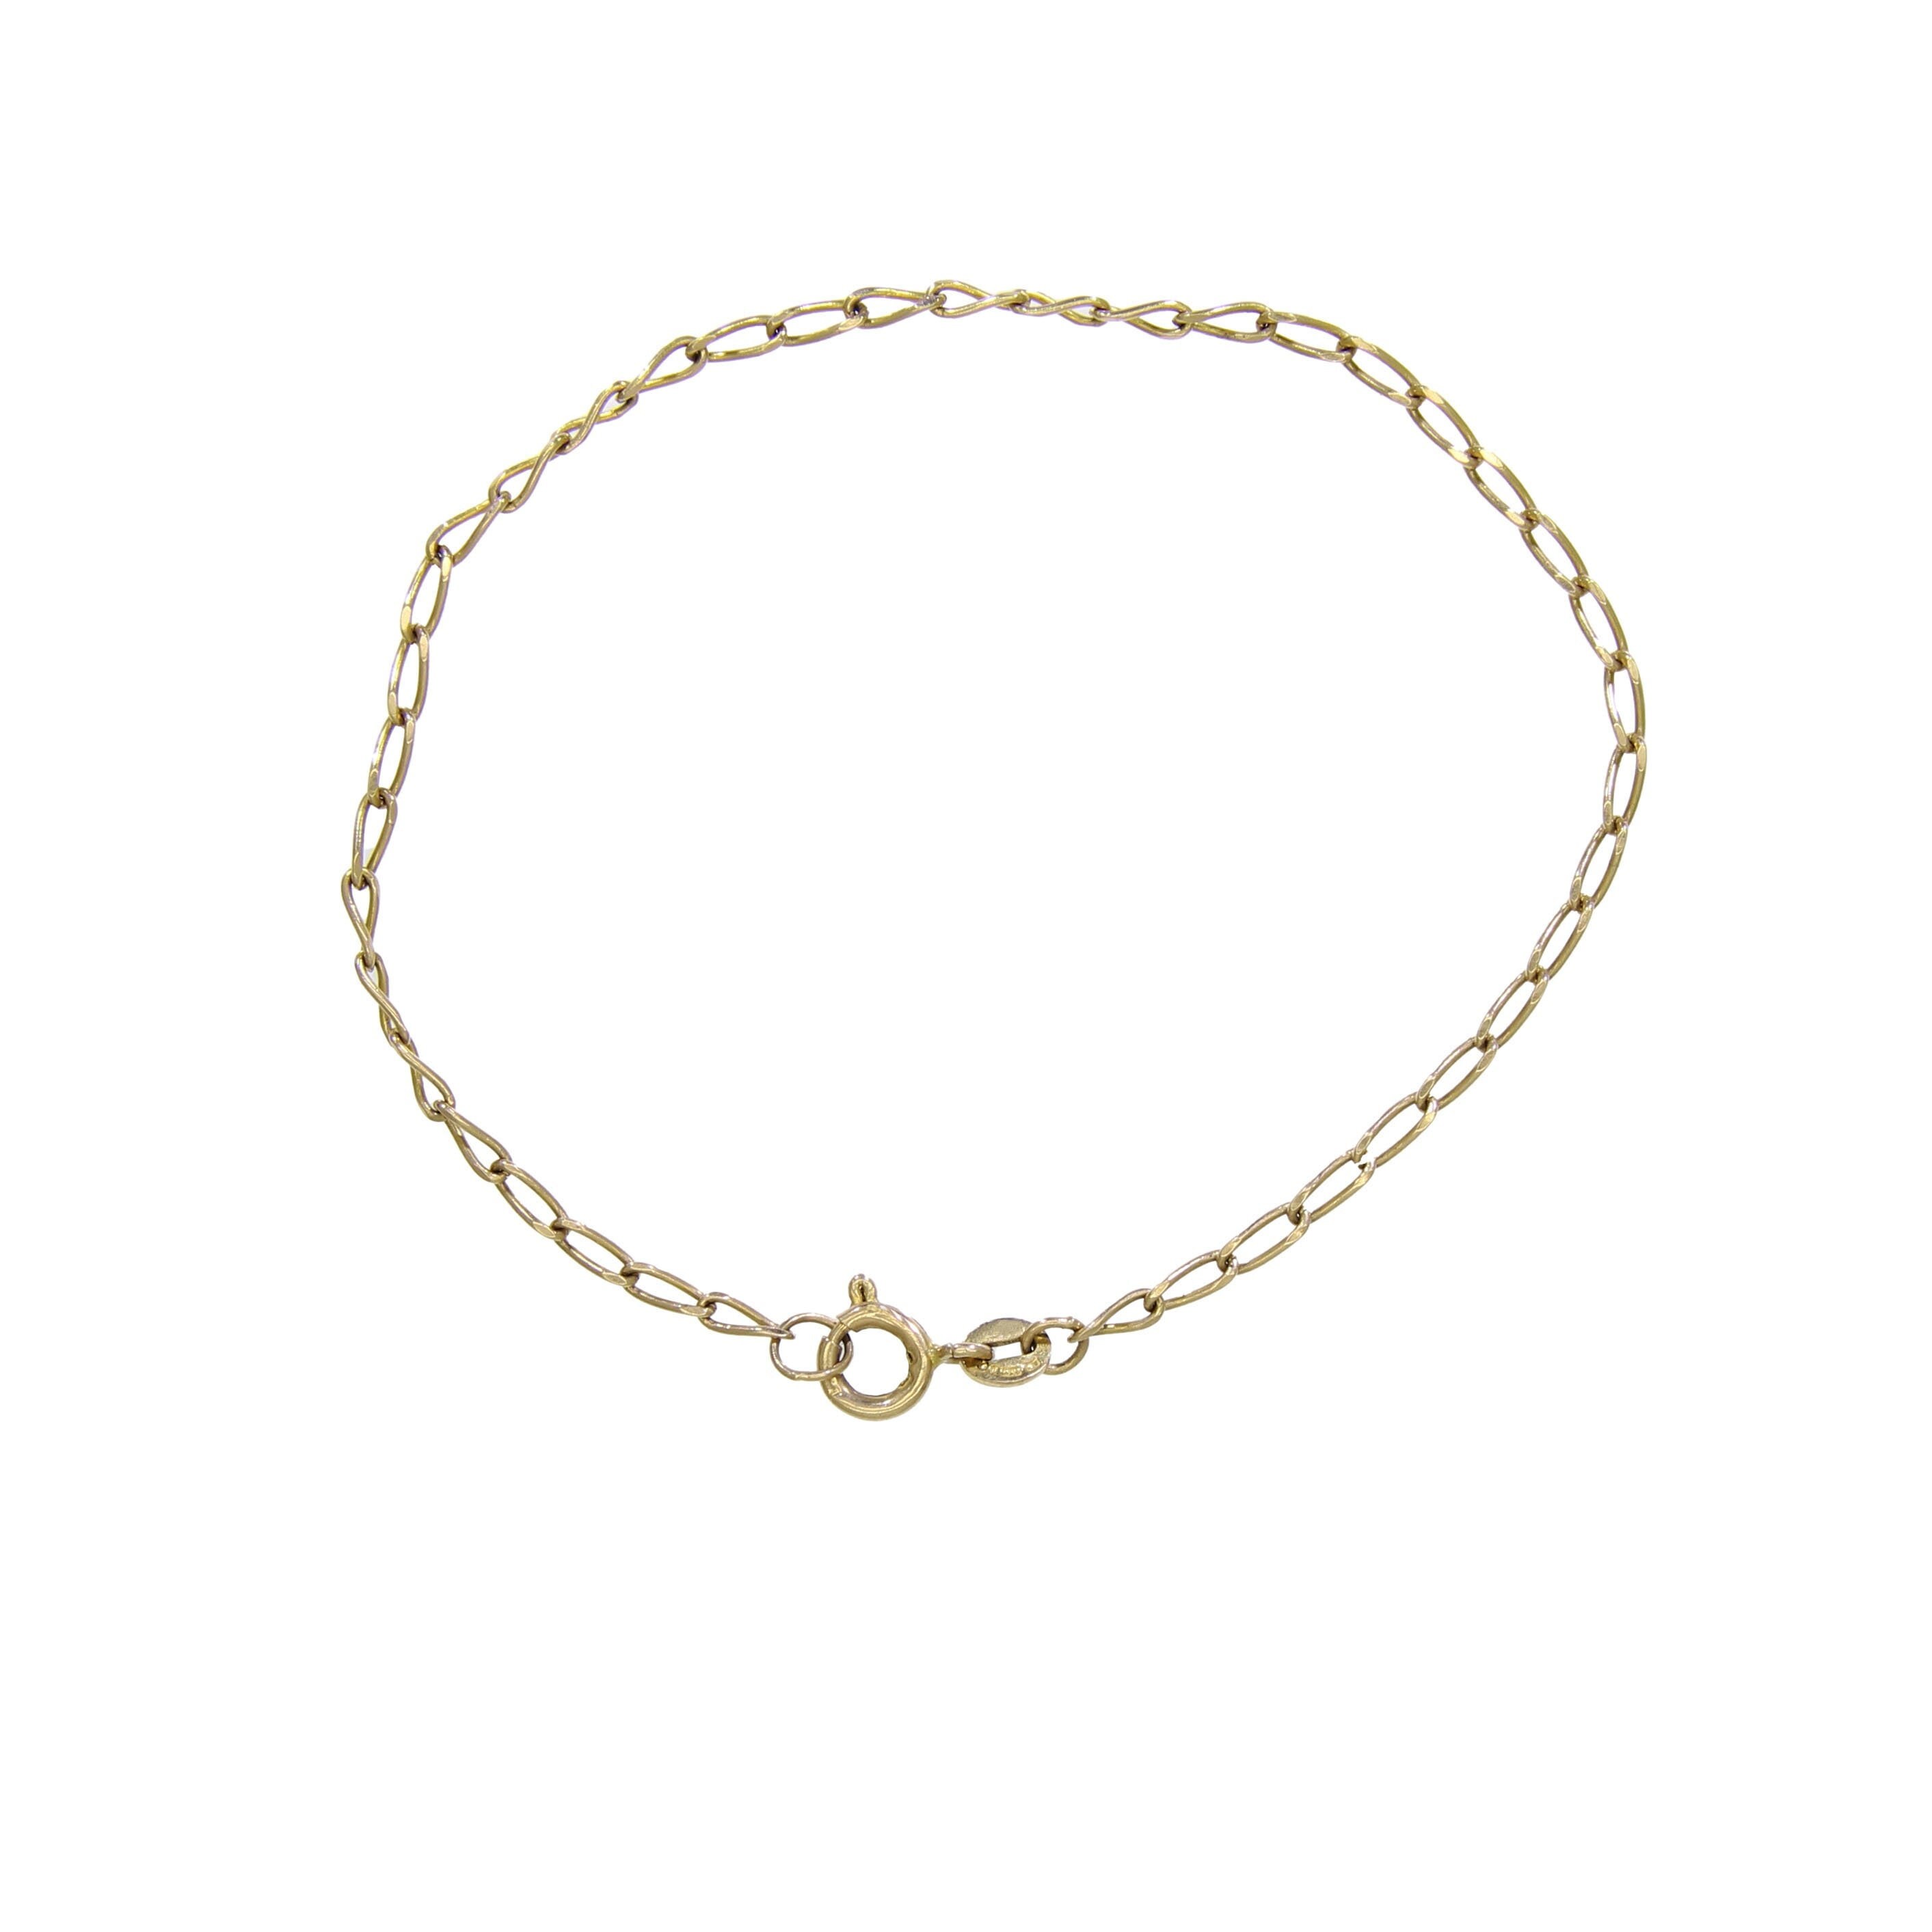 Sparkly 9ct Yellow Gold Anklet 9K Solid Gold 1mm Shiny Chain Anklet 7'' to  11